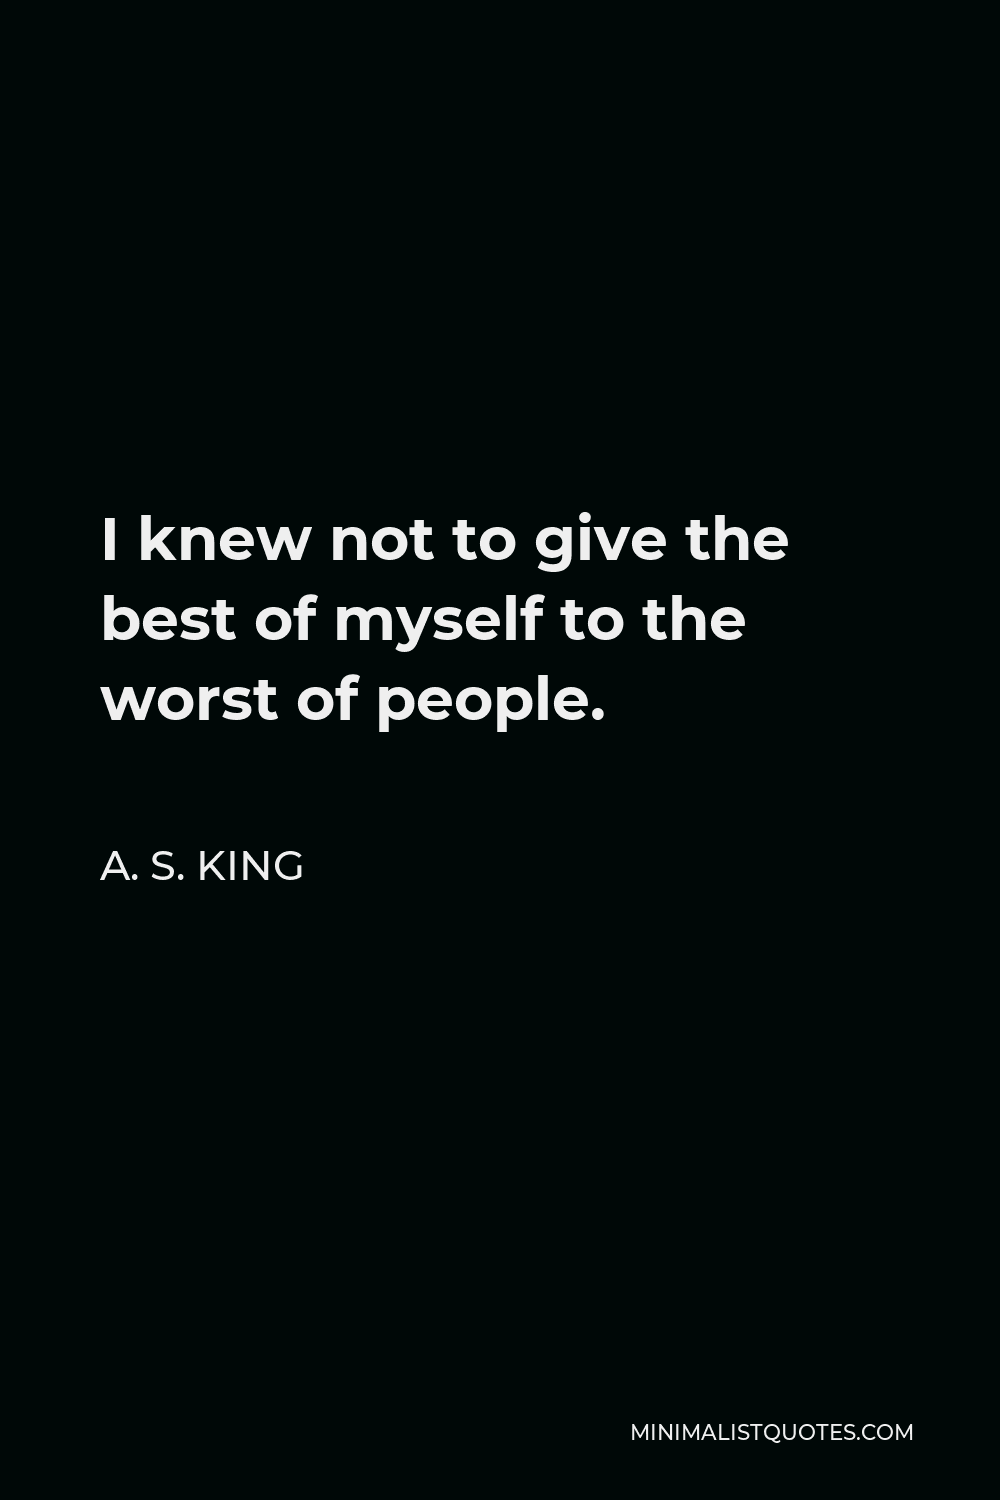 A. S. King Quote - I knew not to give the best of myself to the worst of people.